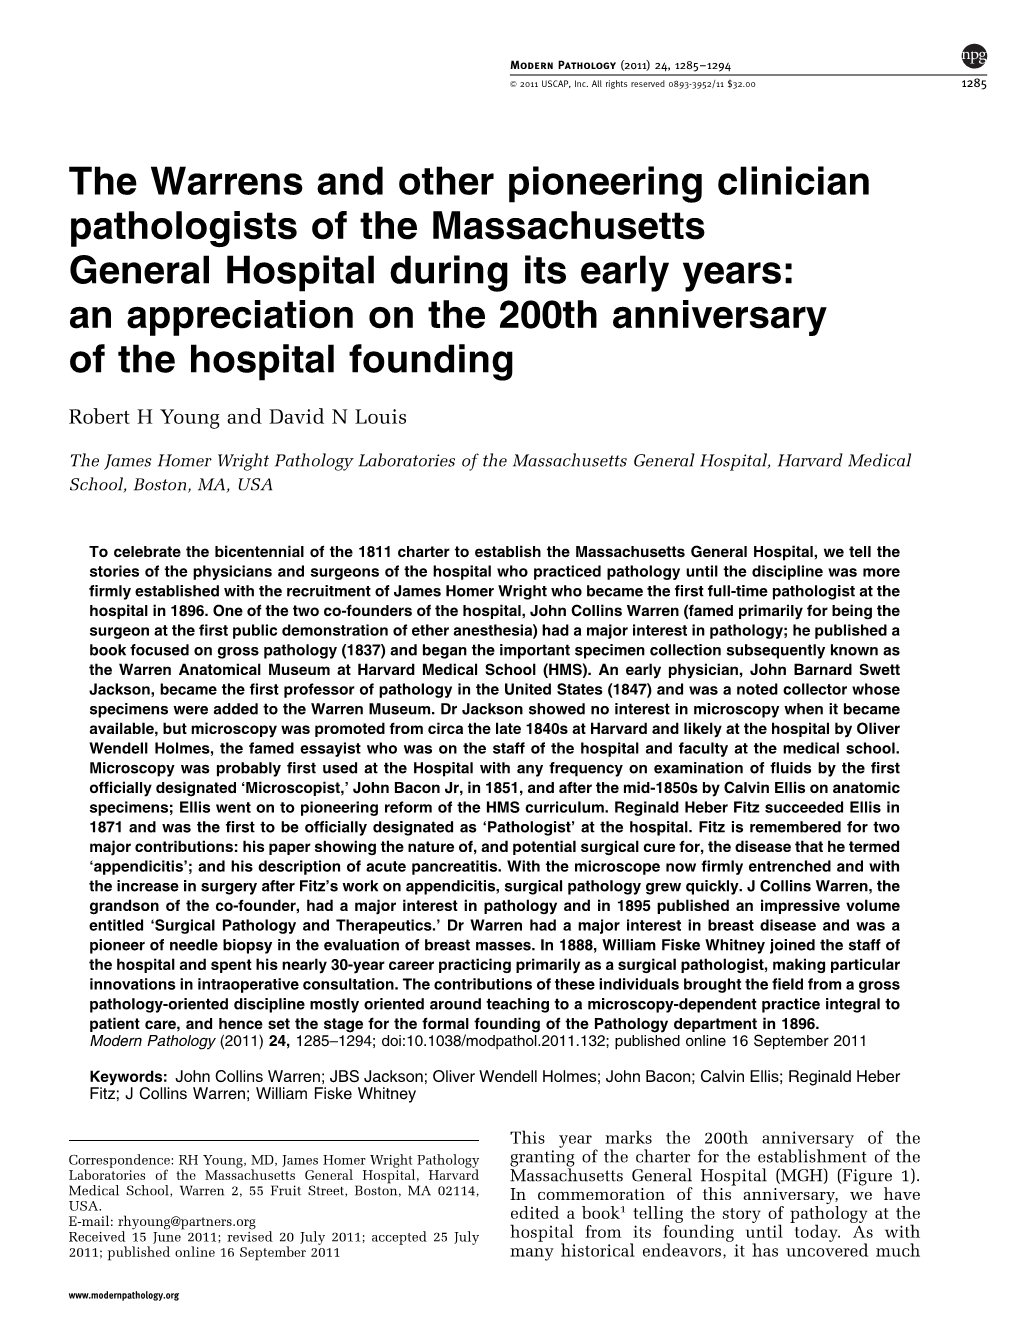 The Warrens and Other Pioneering Clinician Pathologists of The